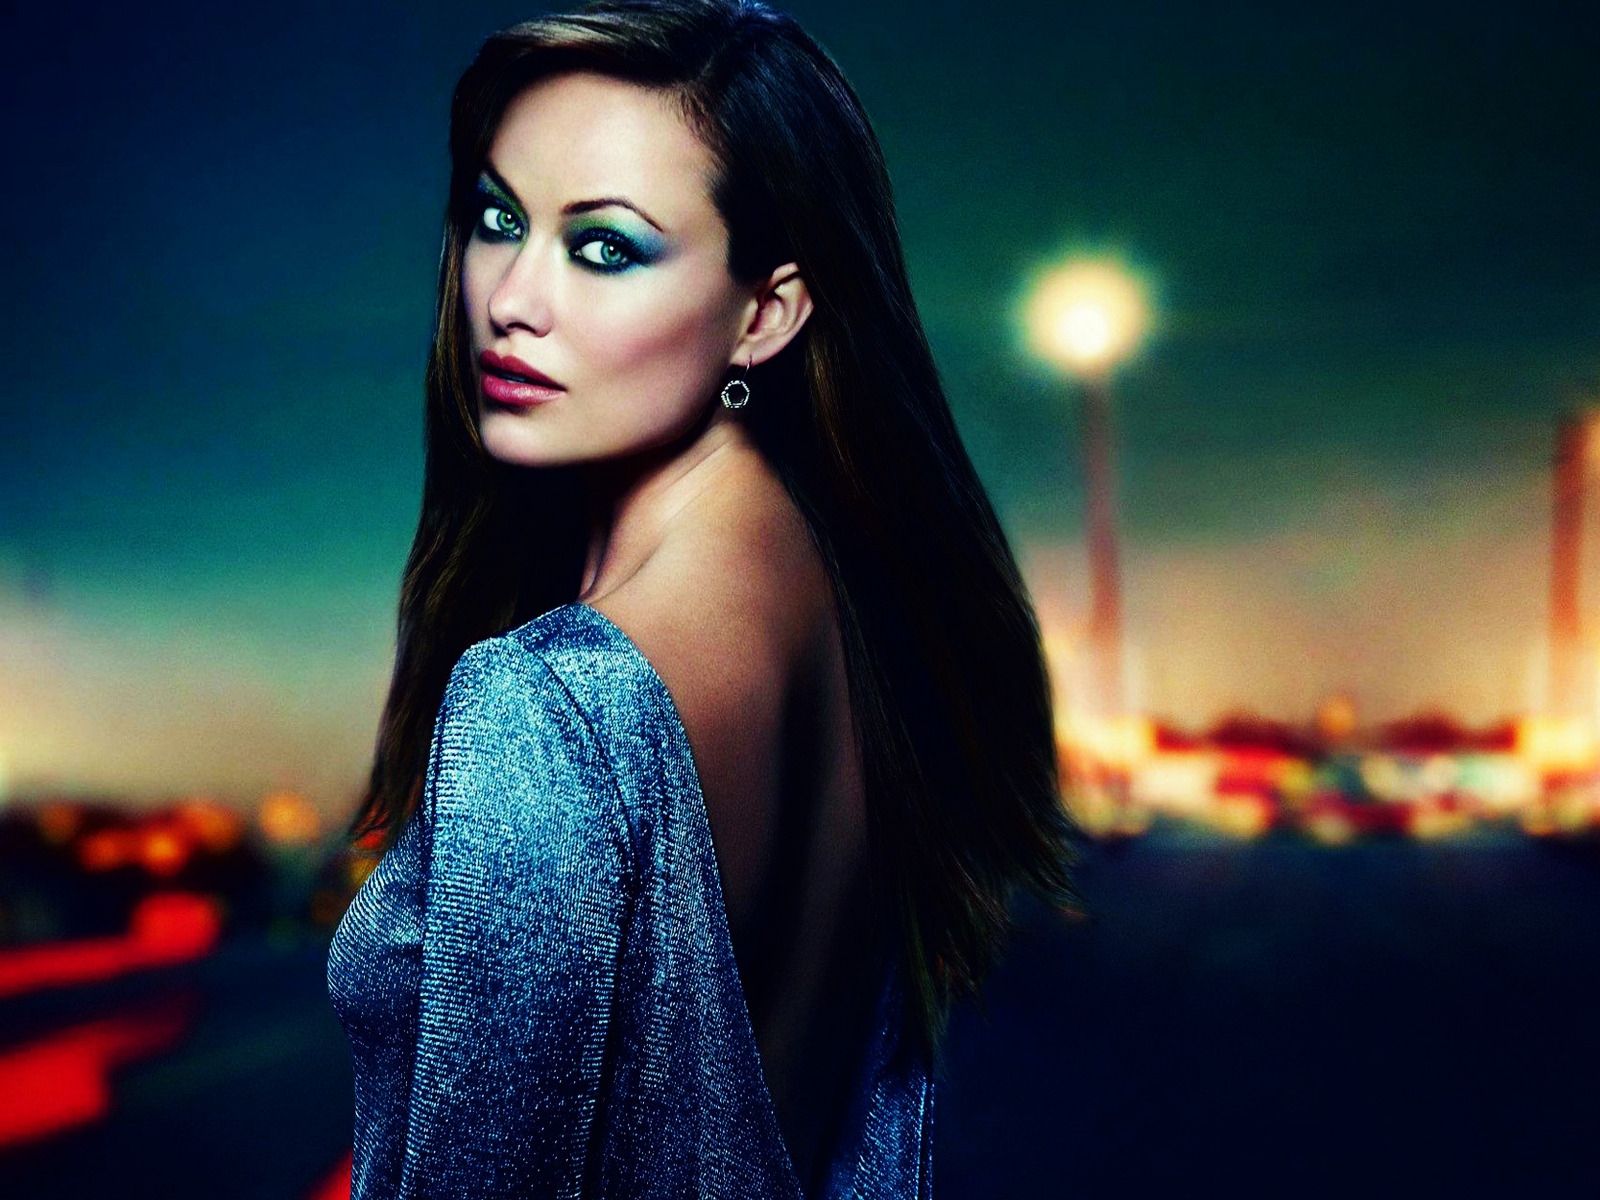 Olivia Wilde Profile Look for 1600 x 1200 resolution